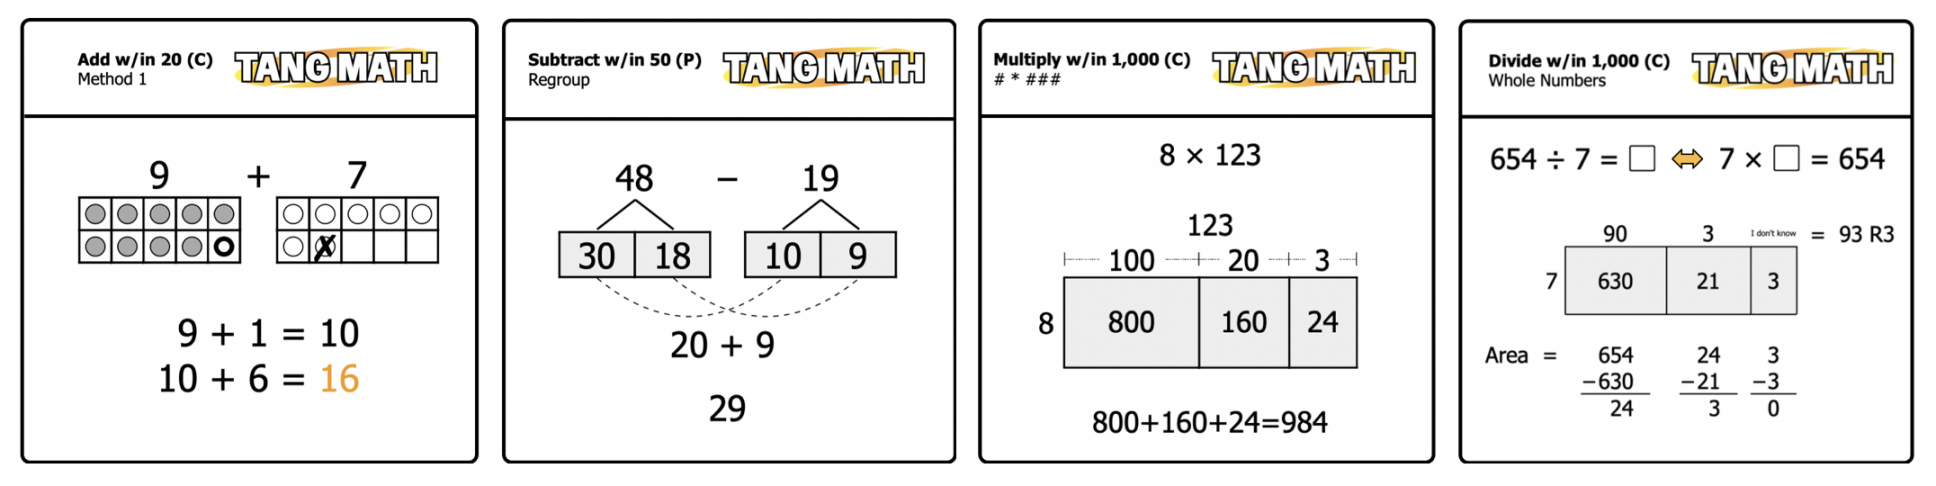 Tang Math - Subscription Overview